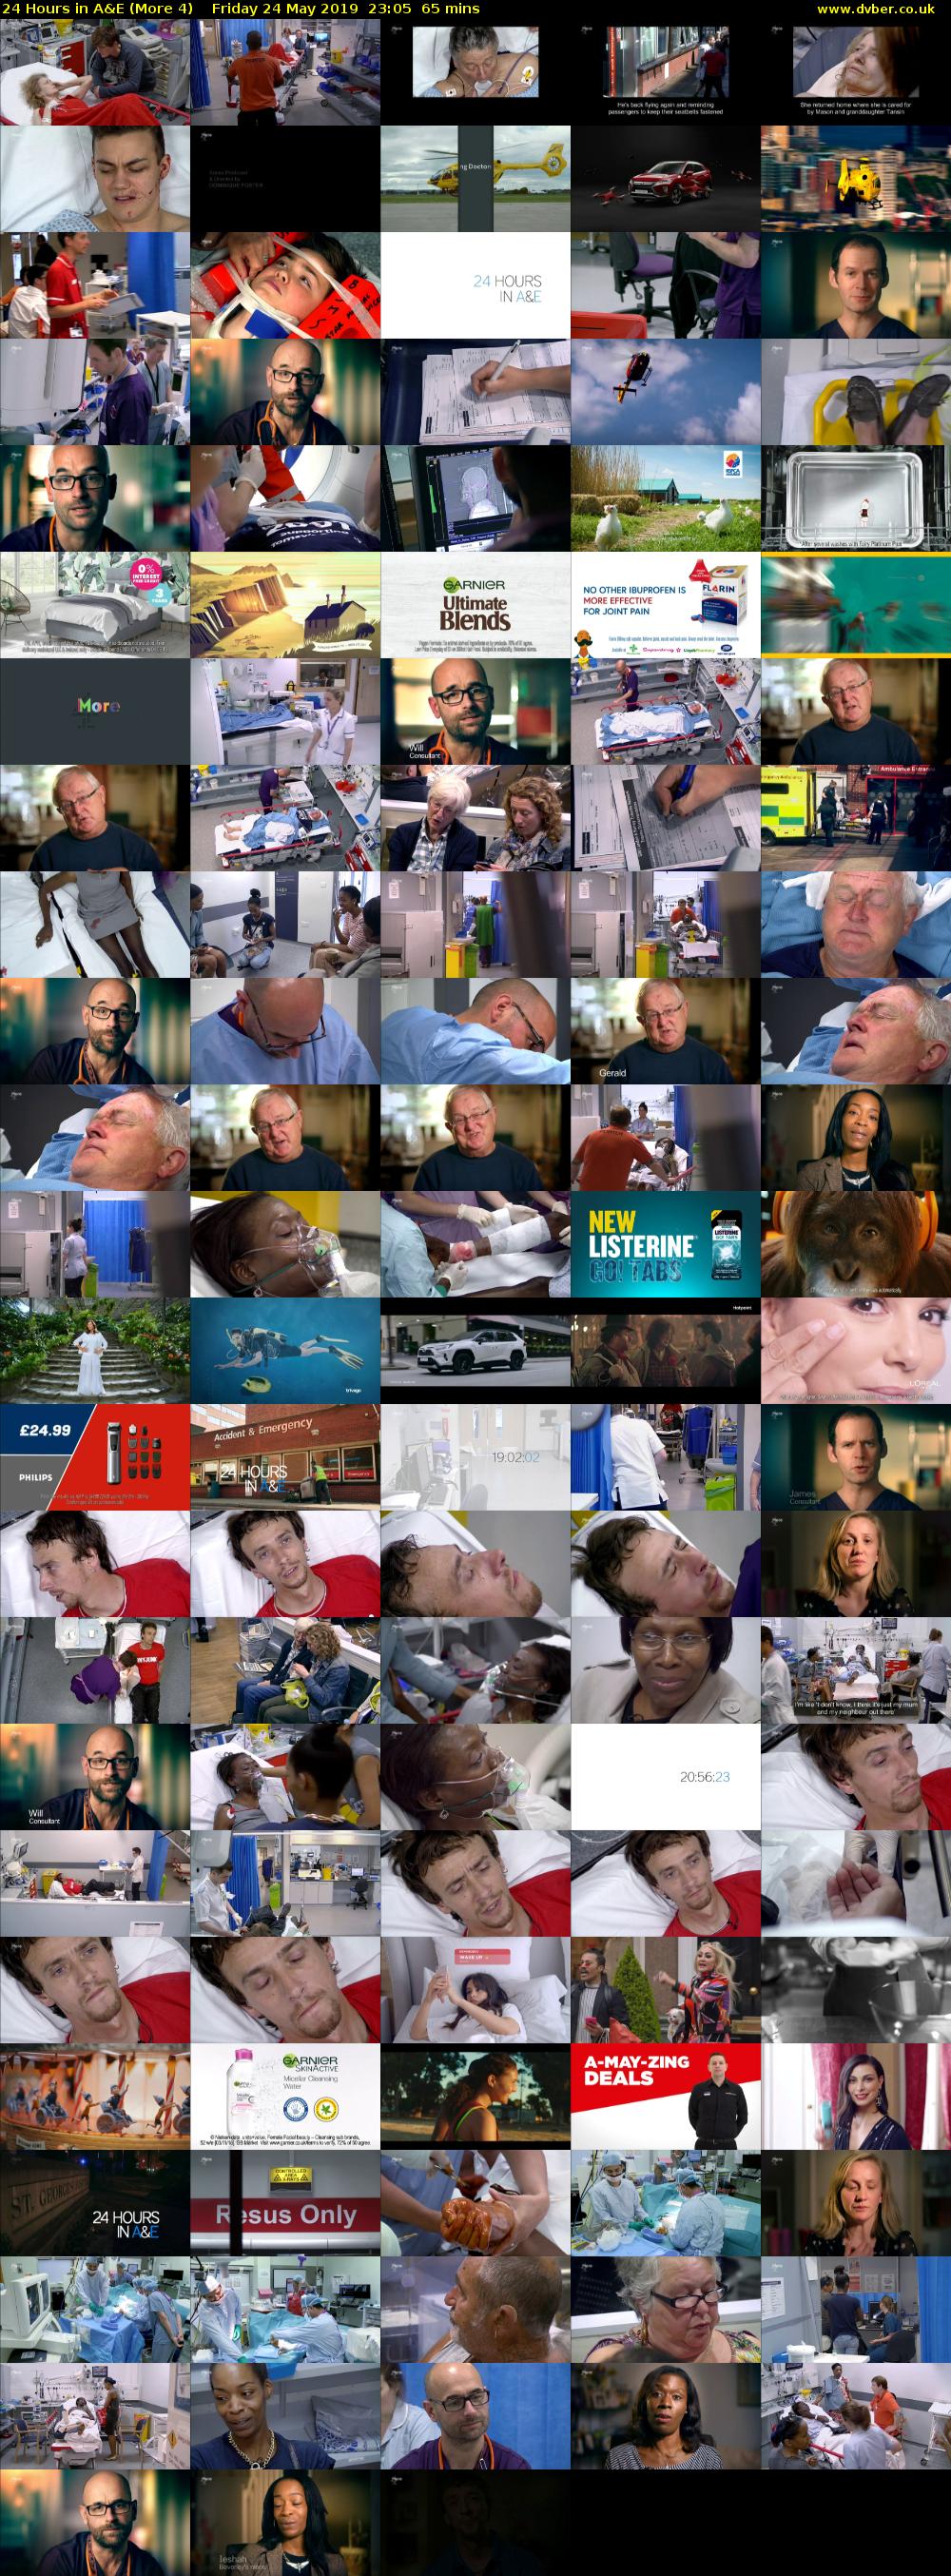 24 Hours in A&E (More 4) Friday 24 May 2019 23:05 - 00:10